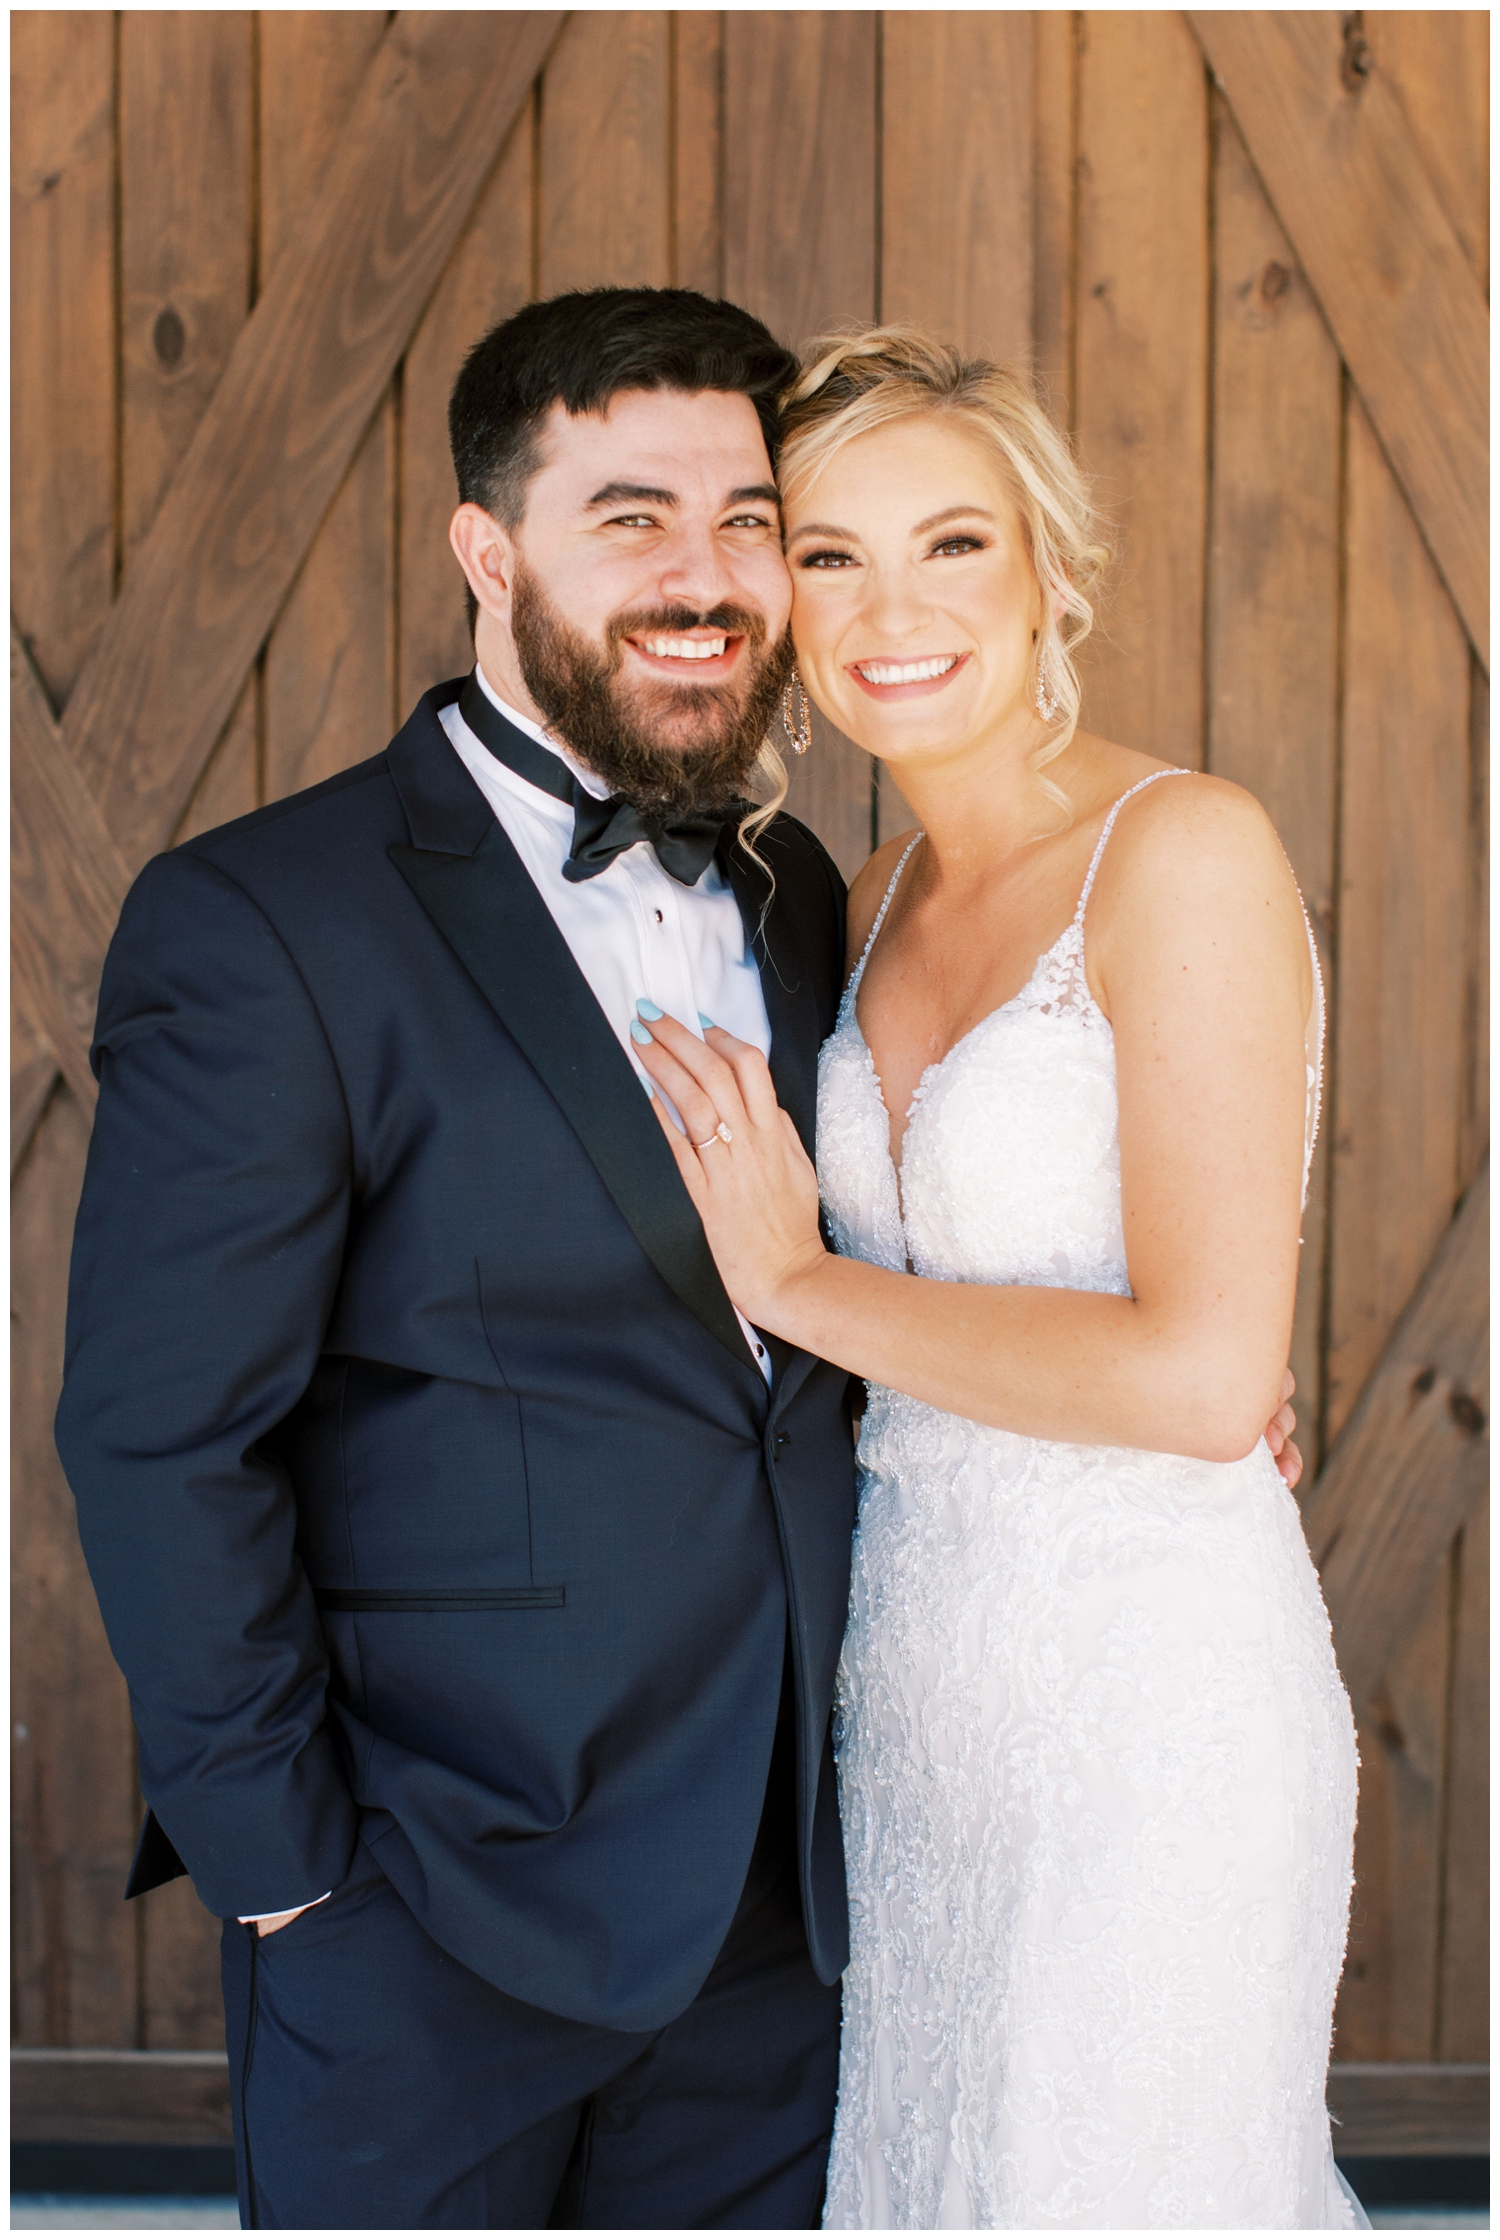 bride and groom smiling at the camera in College Station at Peach Creek Ranch Wedding venue